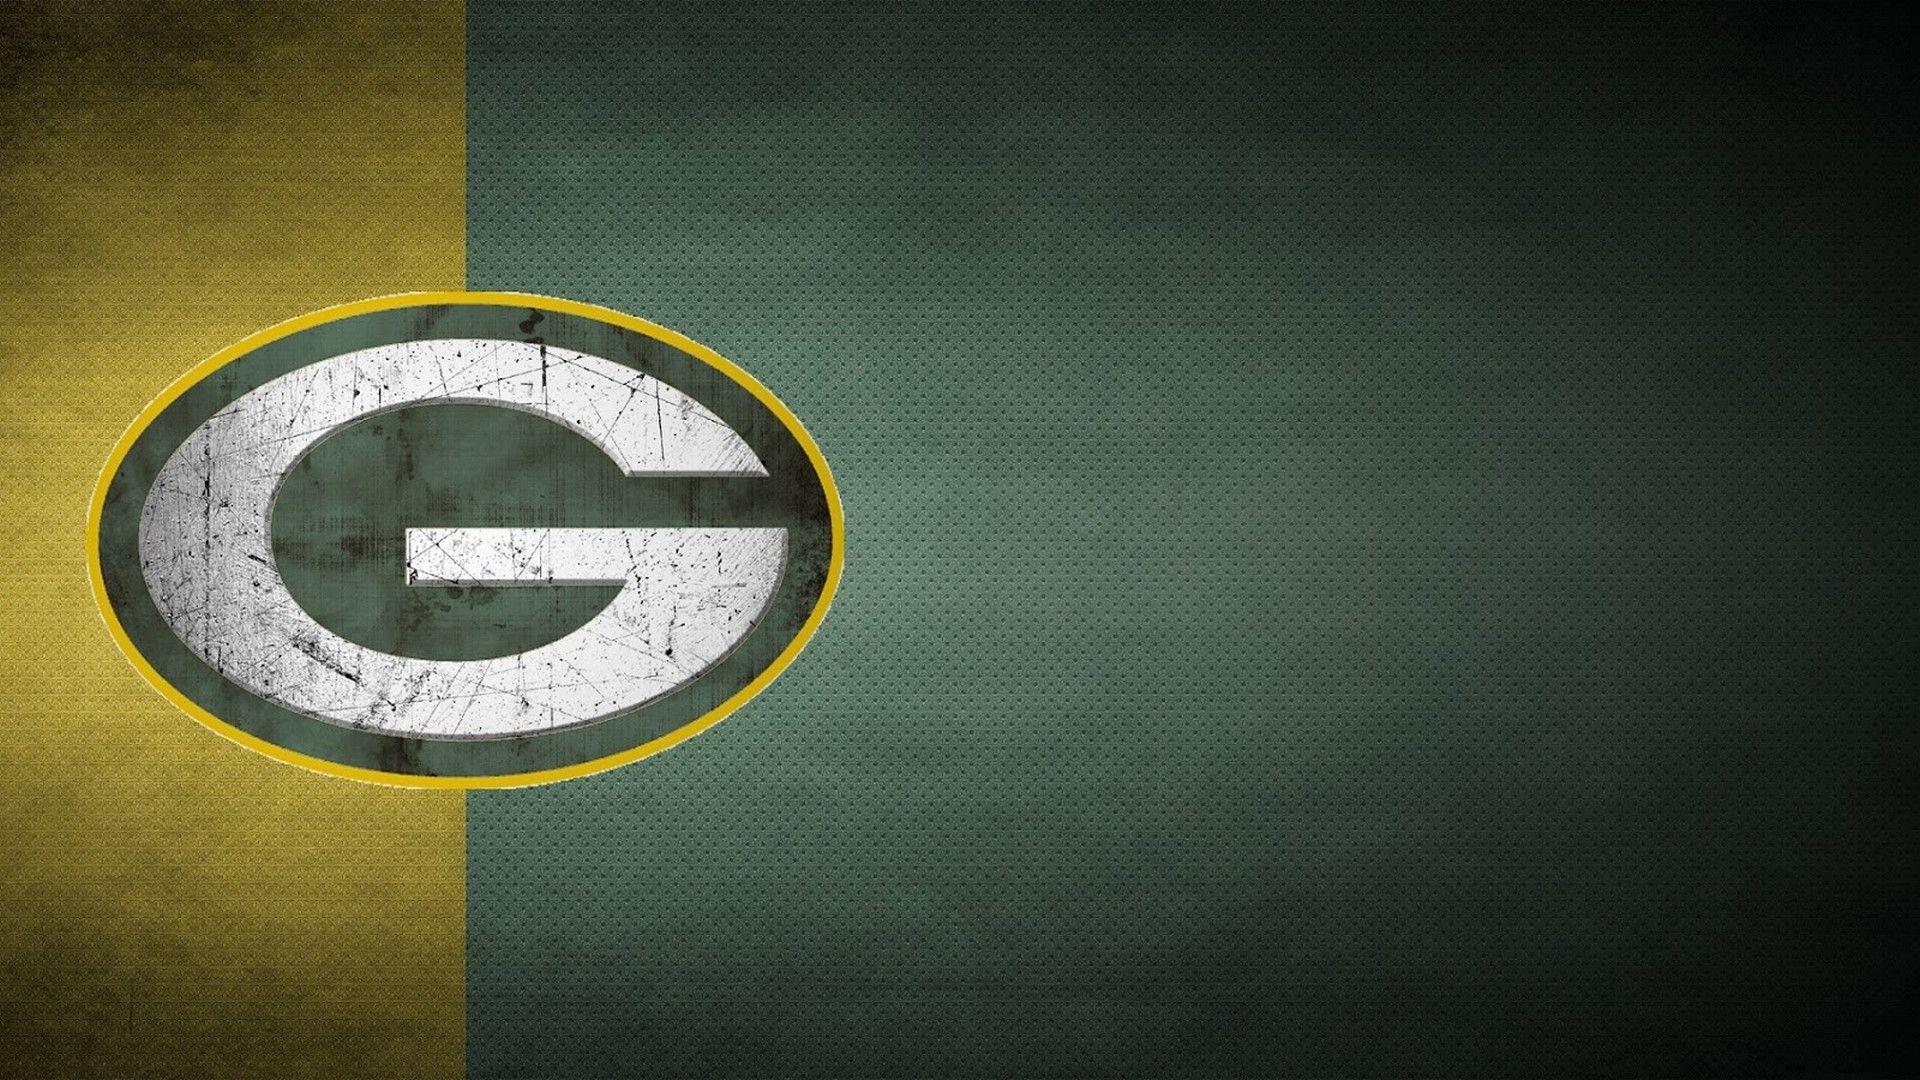 Packers Mobile Wallpapers  Green Bay Packers  packerscom